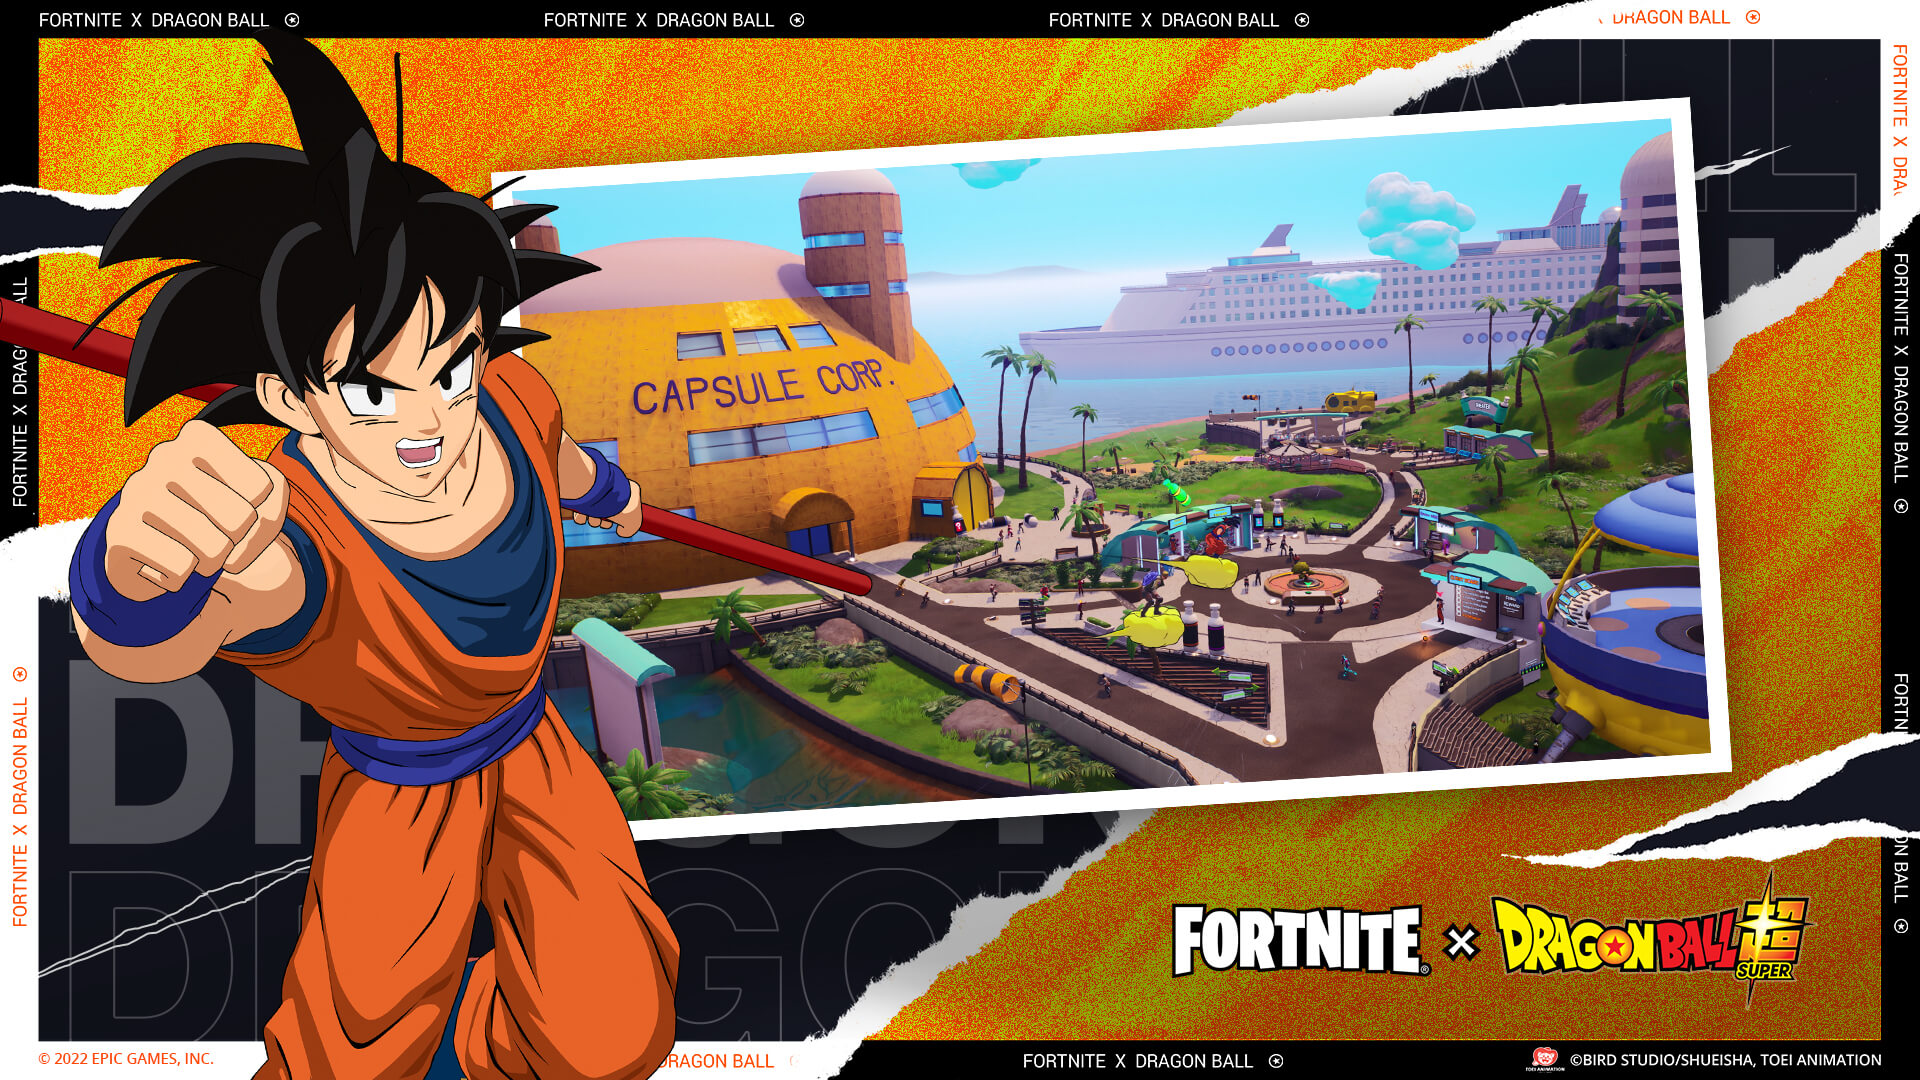 A man wearing an outfit inspired by Japanese martial arts uniforms, stands to the side of a photo of a semi-futuristic city with tropical elements. He is holding his fist up towards the viewer with an enthusiastic expression, while holding a staff in his other hand. The words "Fornite X Dragonball" sit in the bottom corner of the this image.